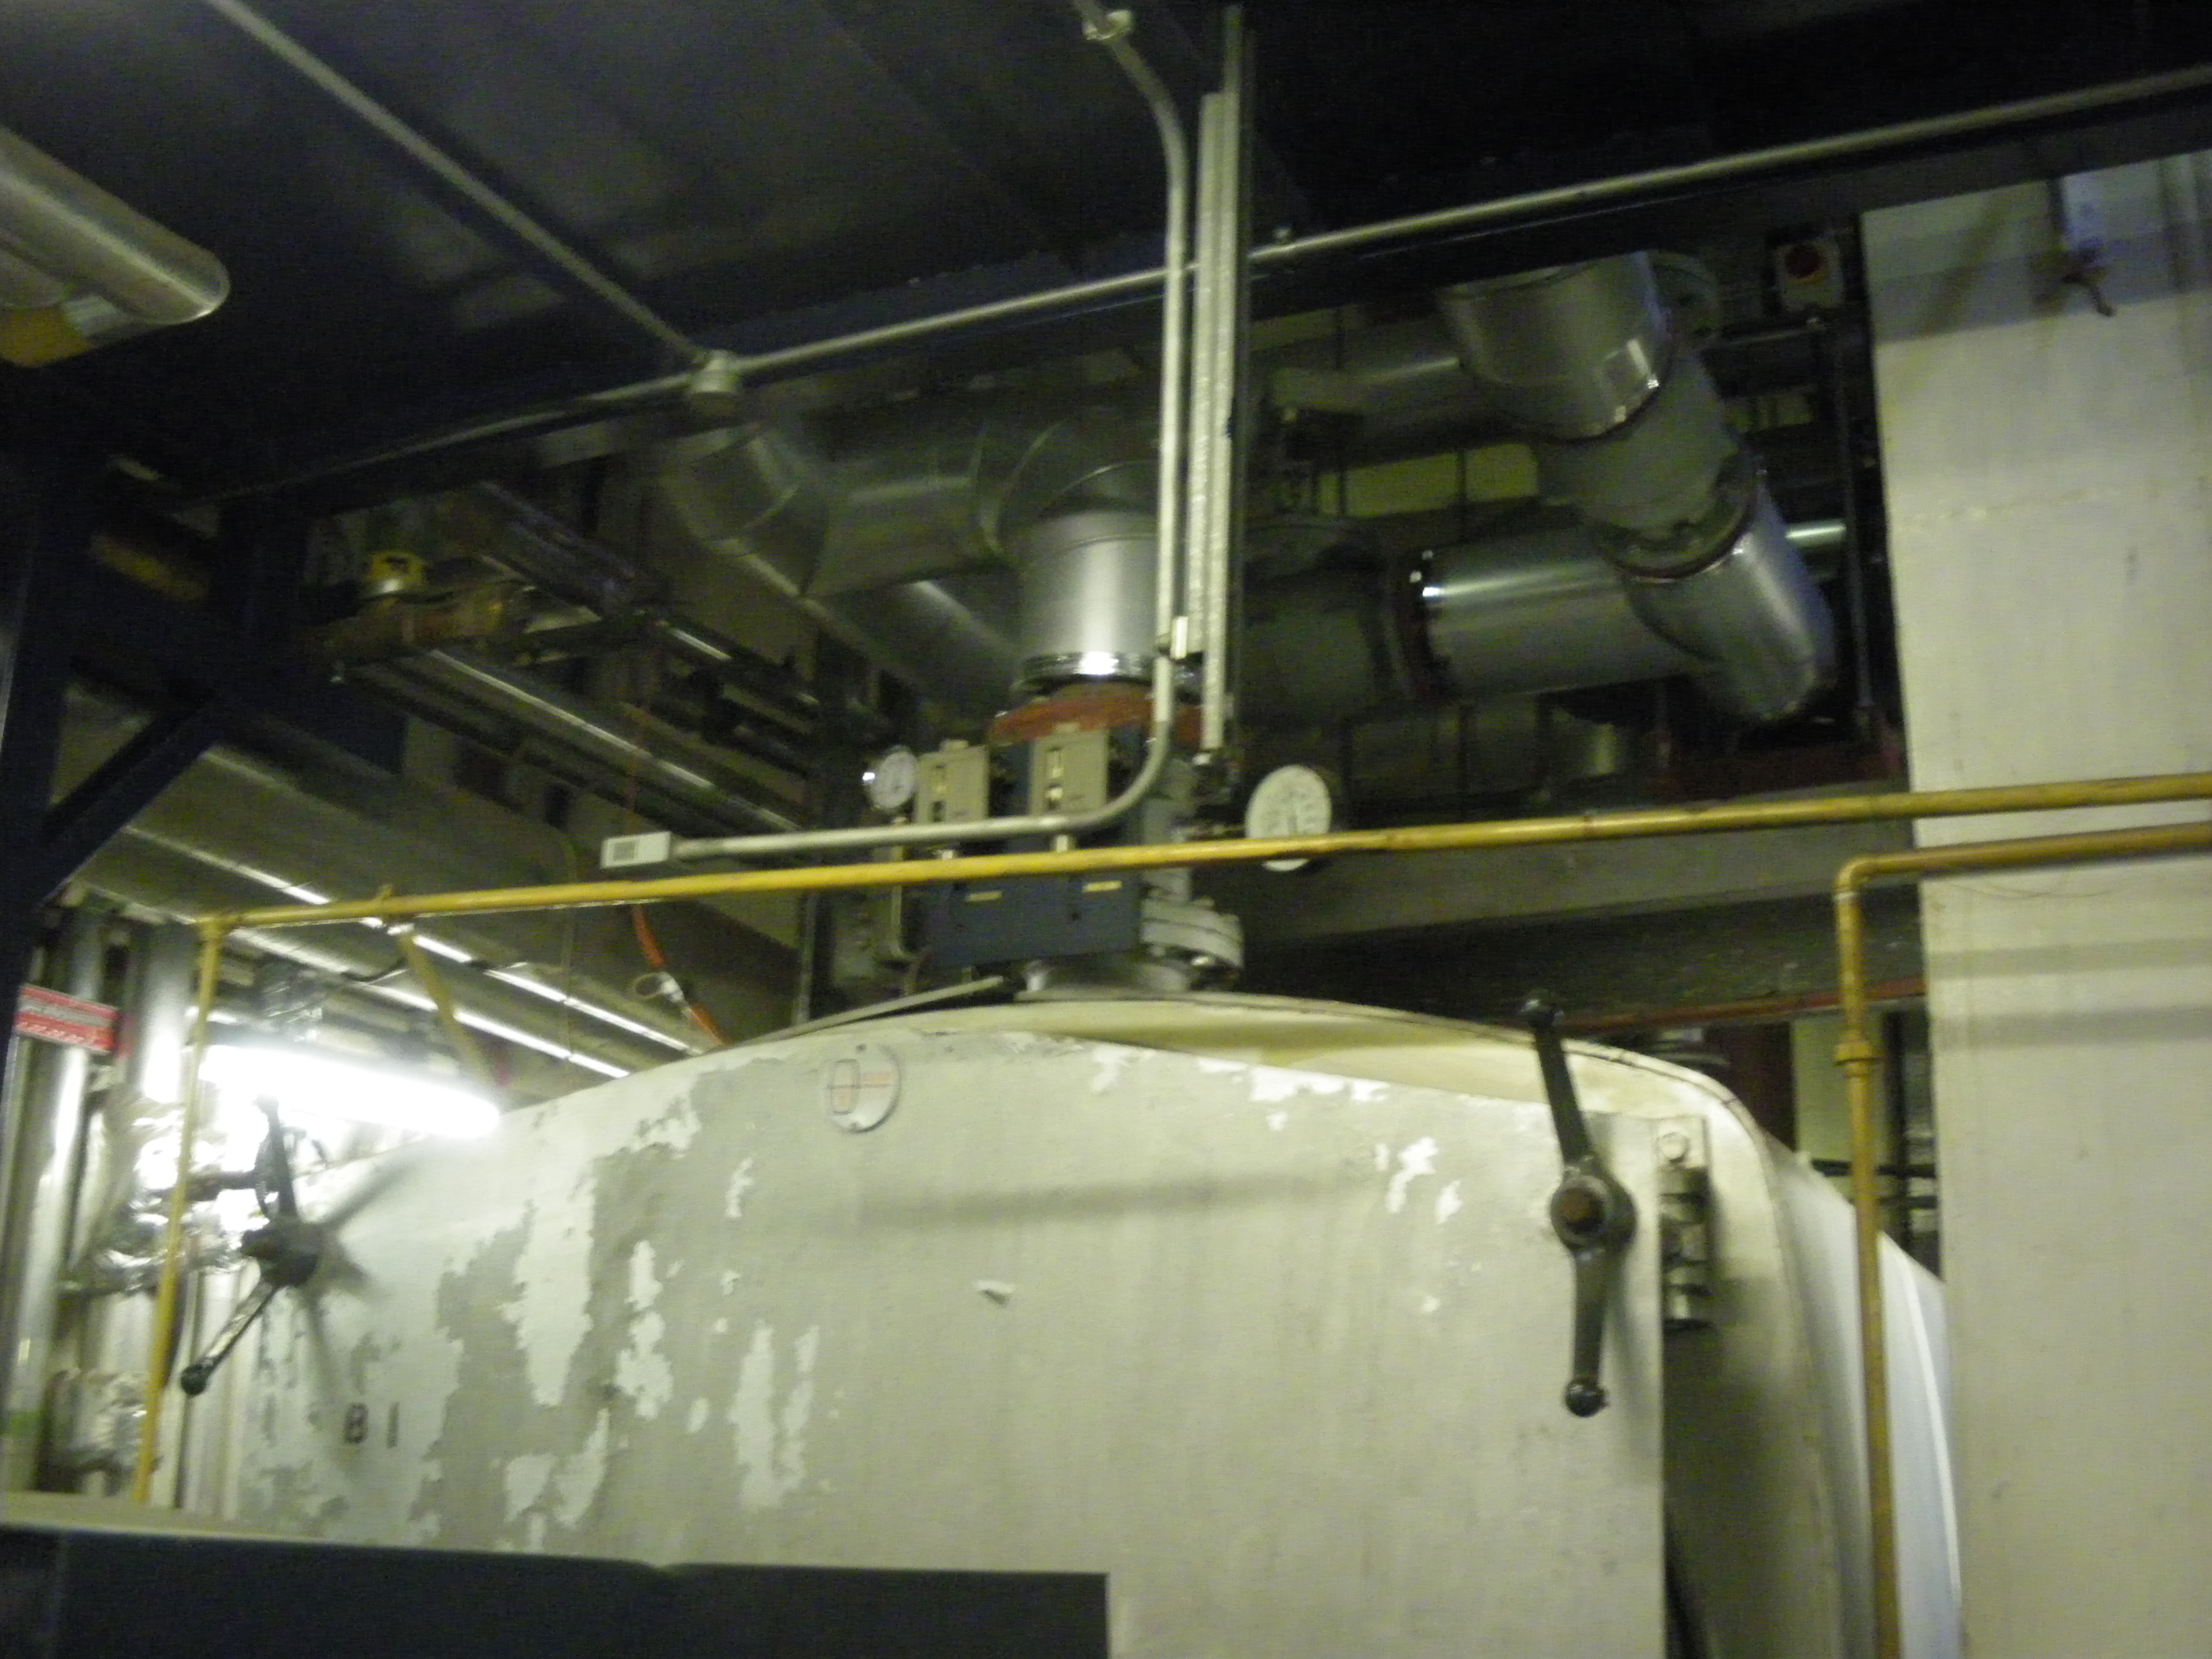 Pipework above one of the boilers